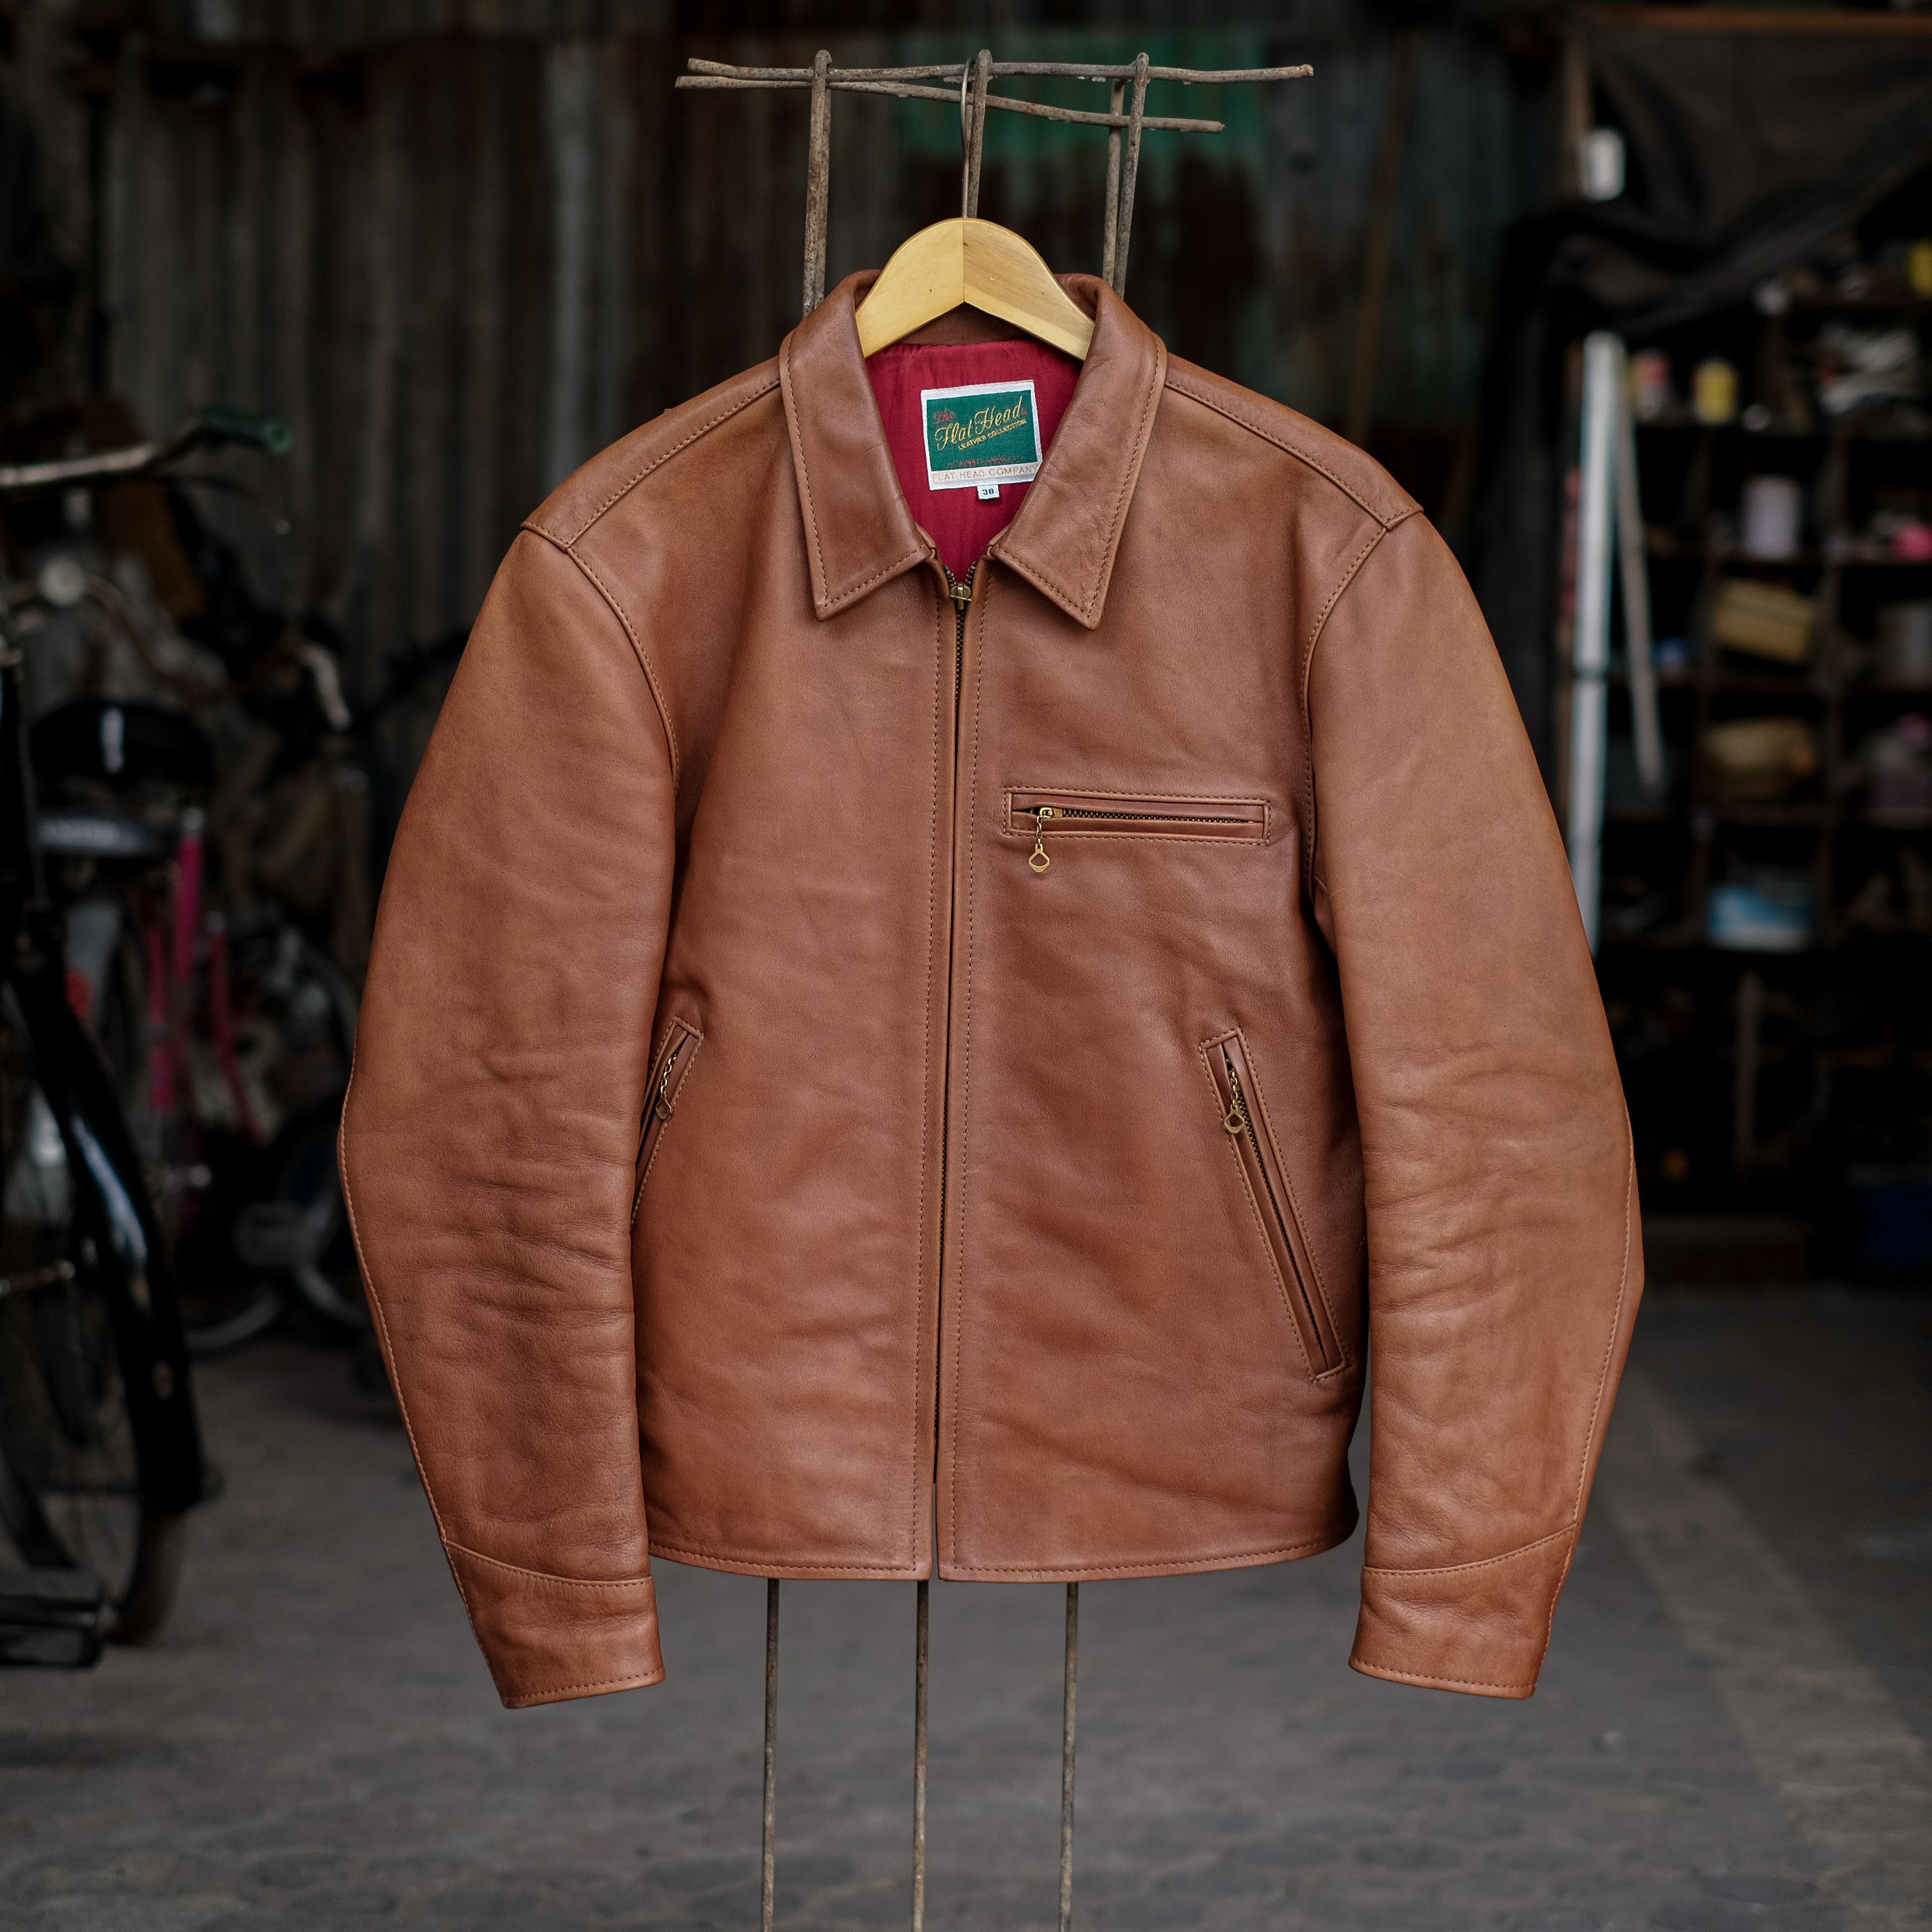 The Flat Head The Flat Head Leather Horsehide RiderJacket Size US S / EU 44-46 / 1 - 1 Preview